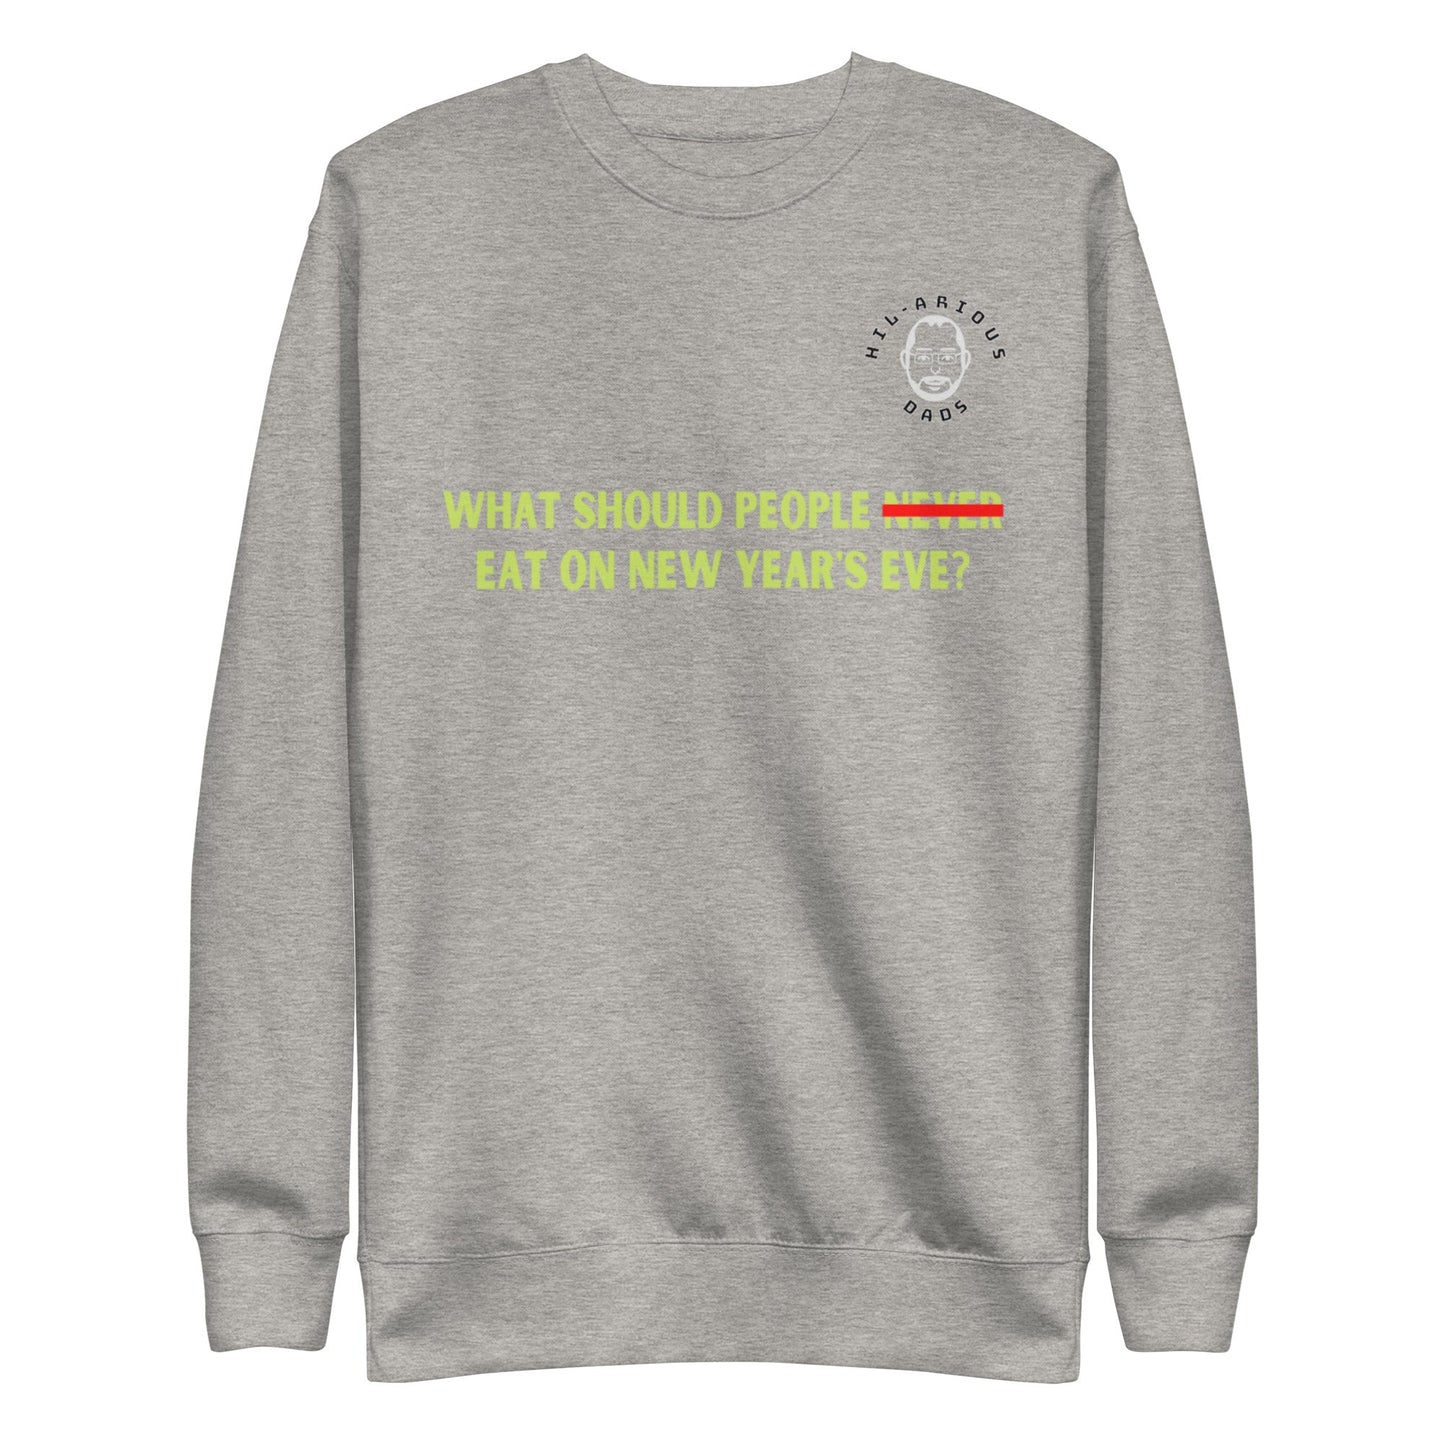 What should people NEVER eat on New Year's Eve?-Sweatshirt - Hil-arious Dads